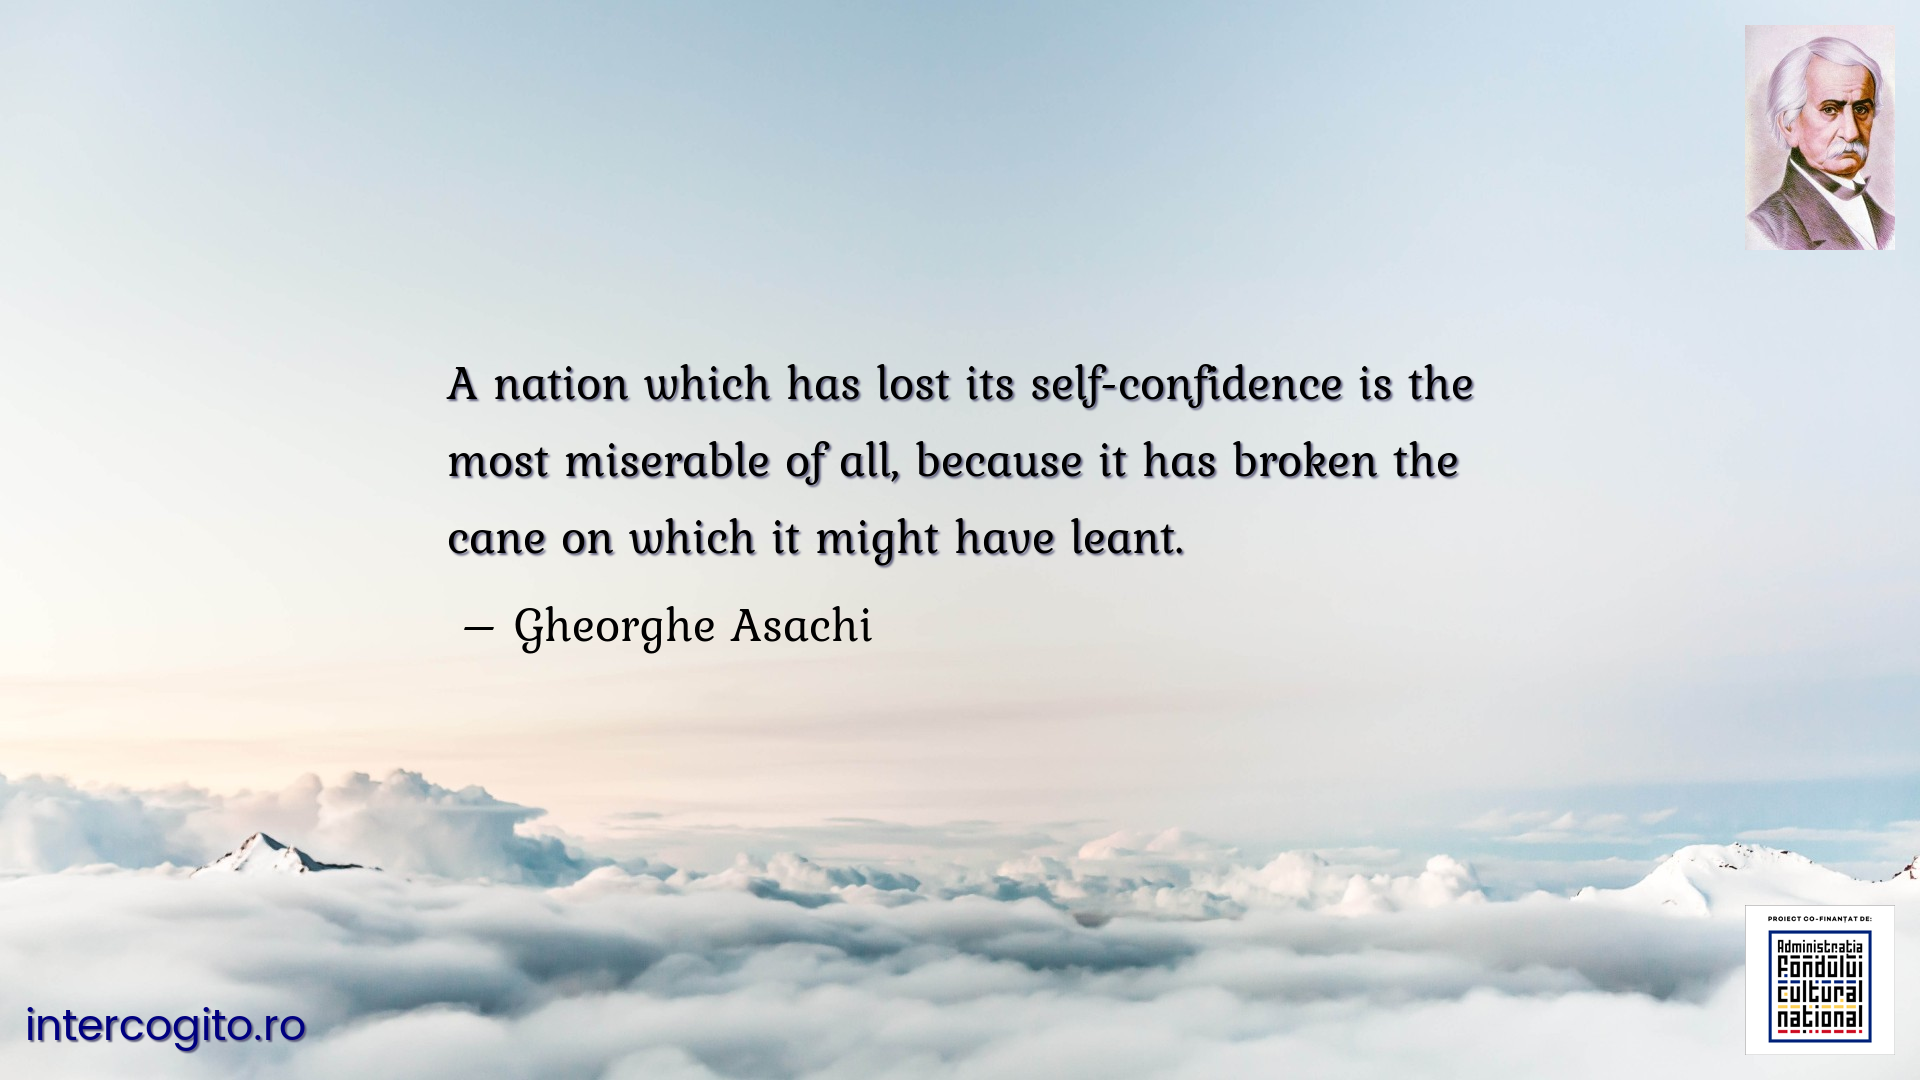 A nation which has lost its self-confidence is the most miserable of all, because it has broken the cane on which it might have leant.